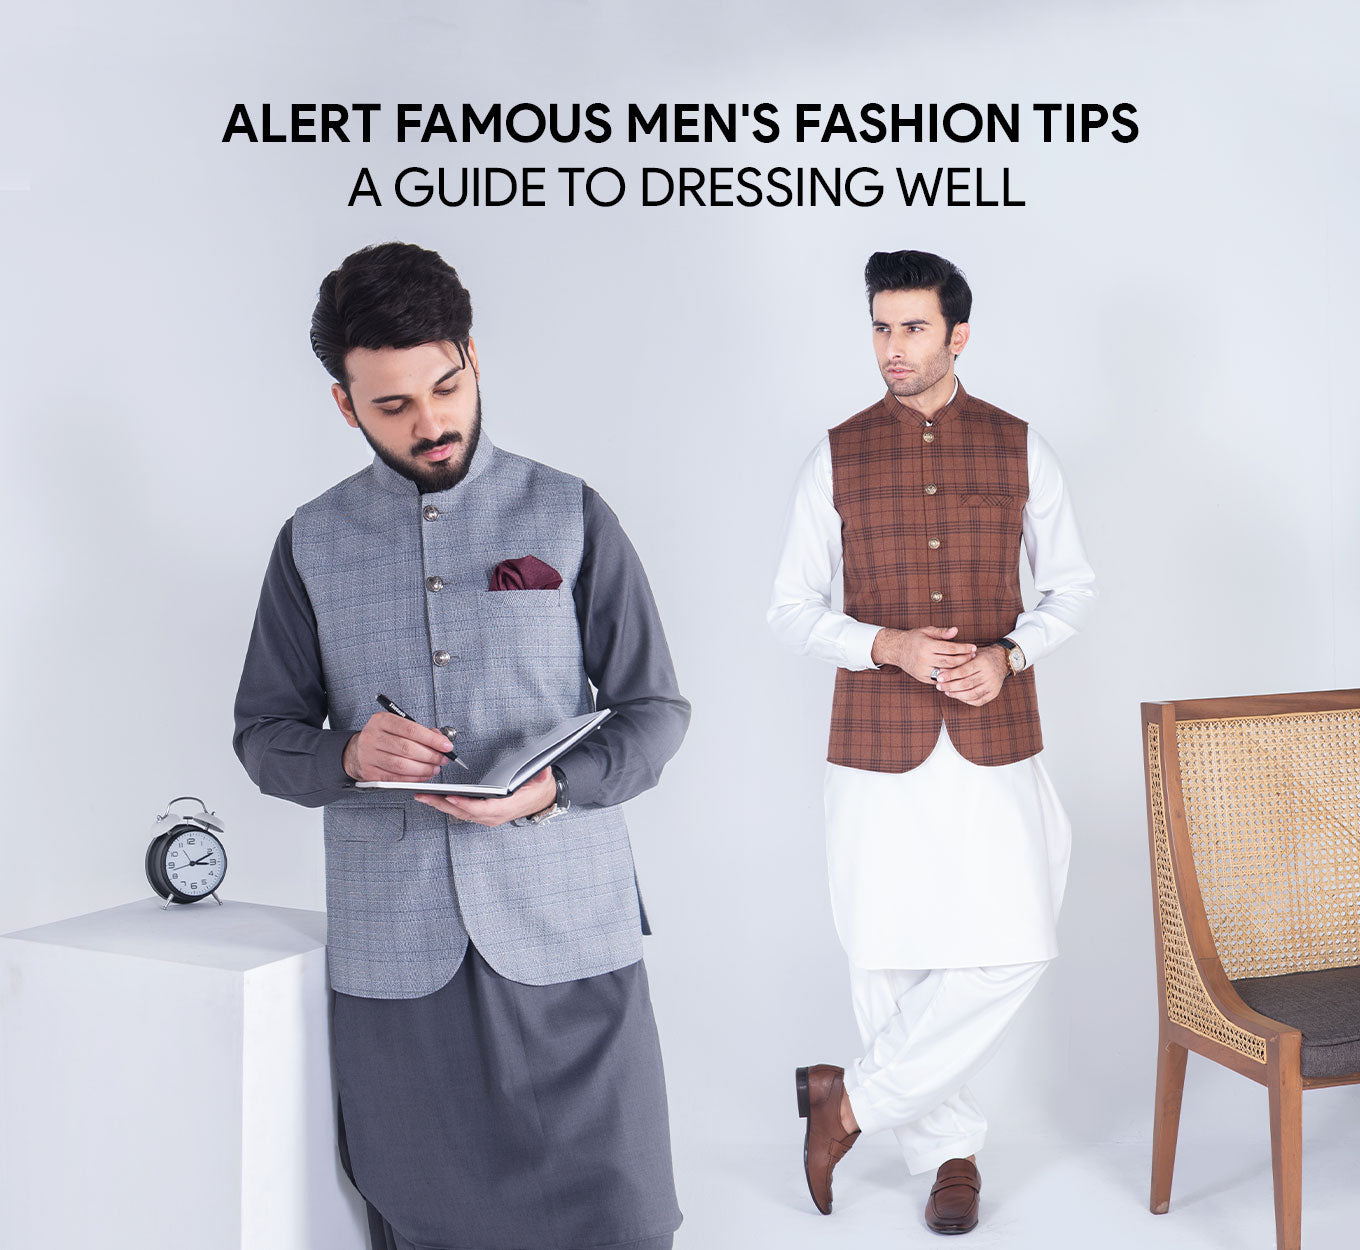 Alert Famous Men's Fashion Tips - A Guide to Dressing Well – Dandy